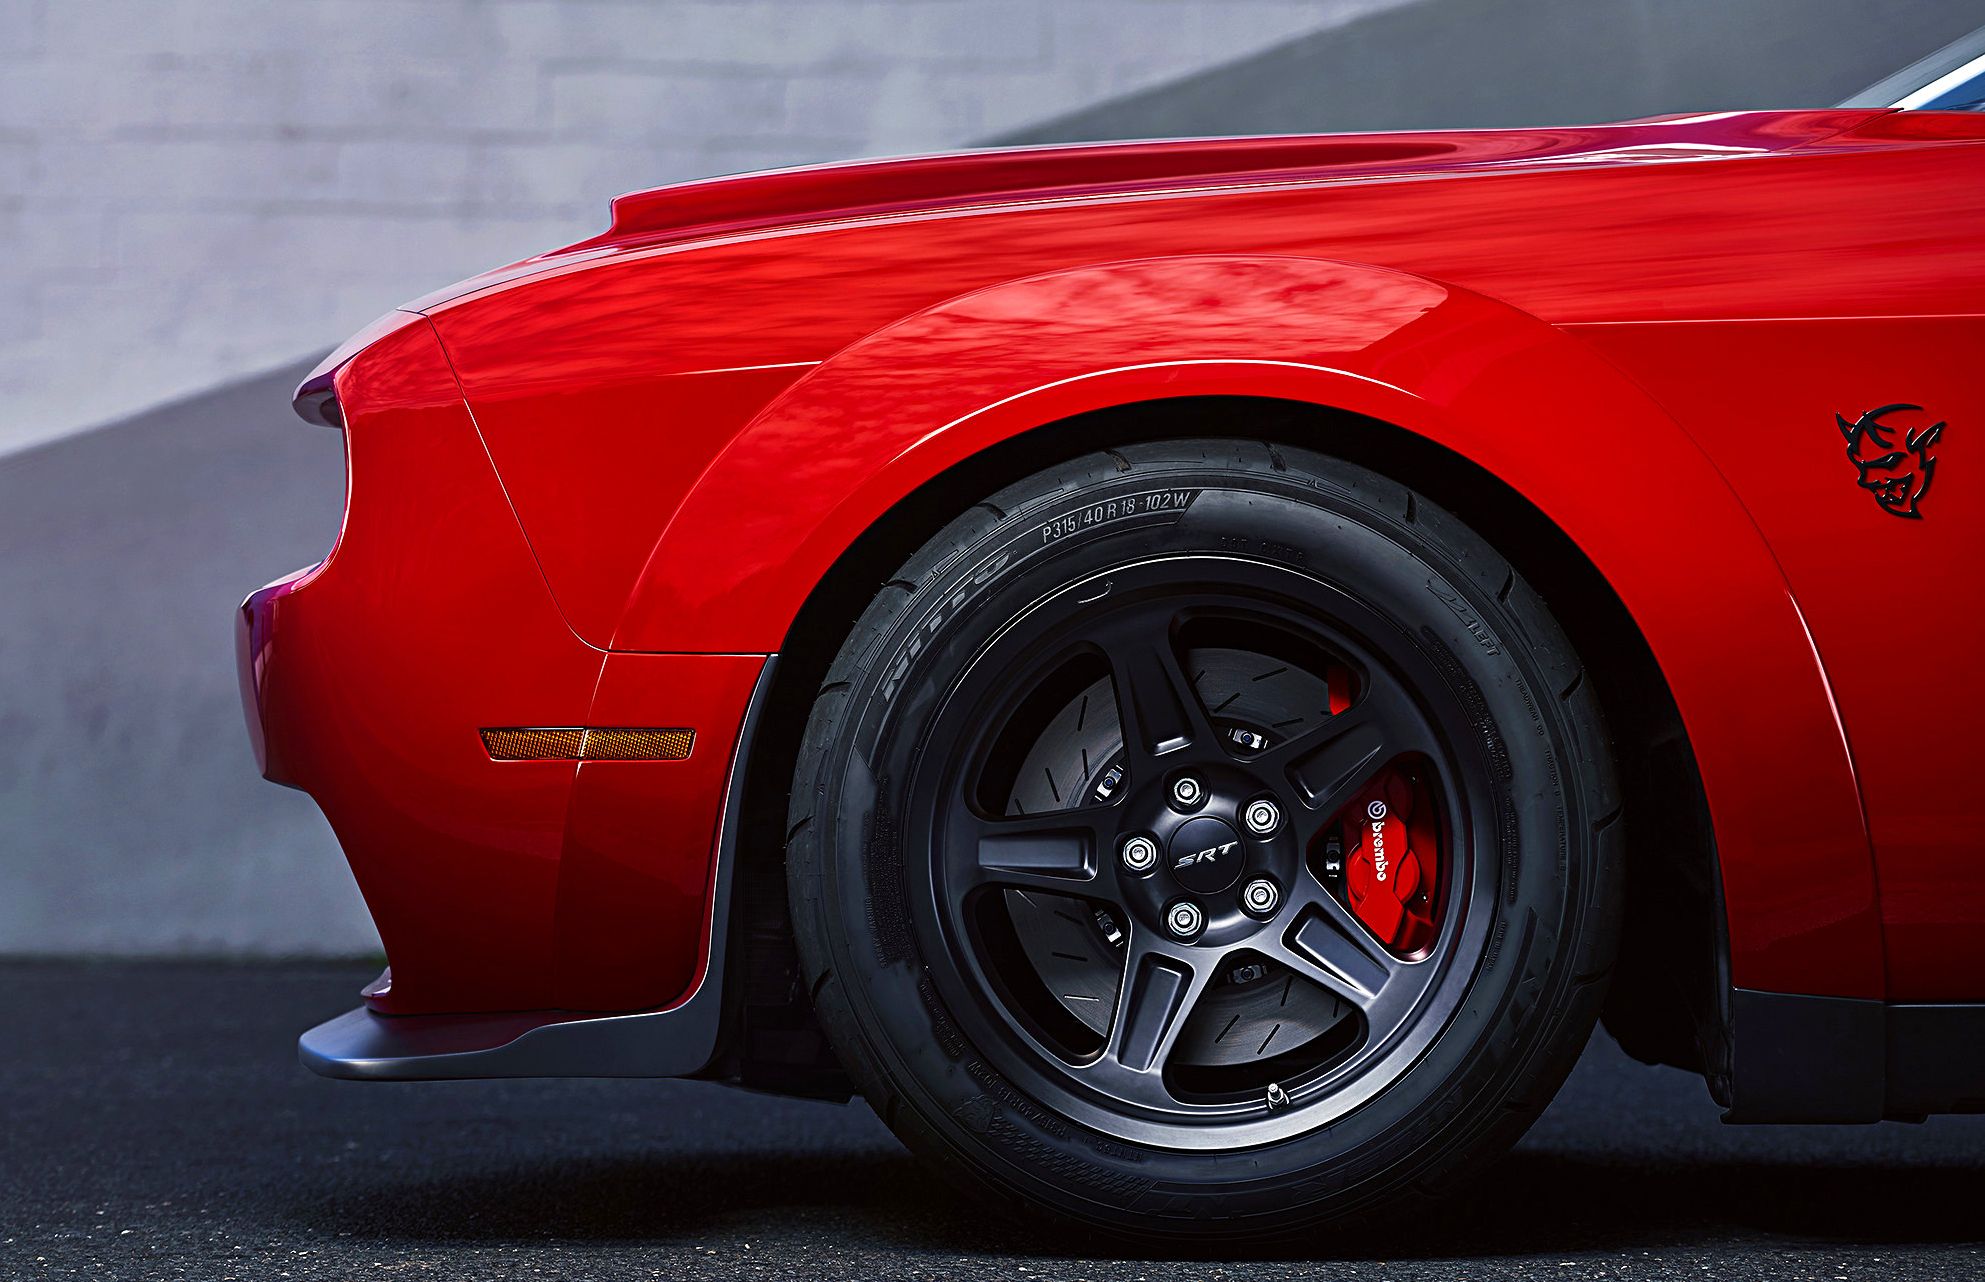 The 2018 Dodge Challenger SRT Demon is equipped with a set of fo